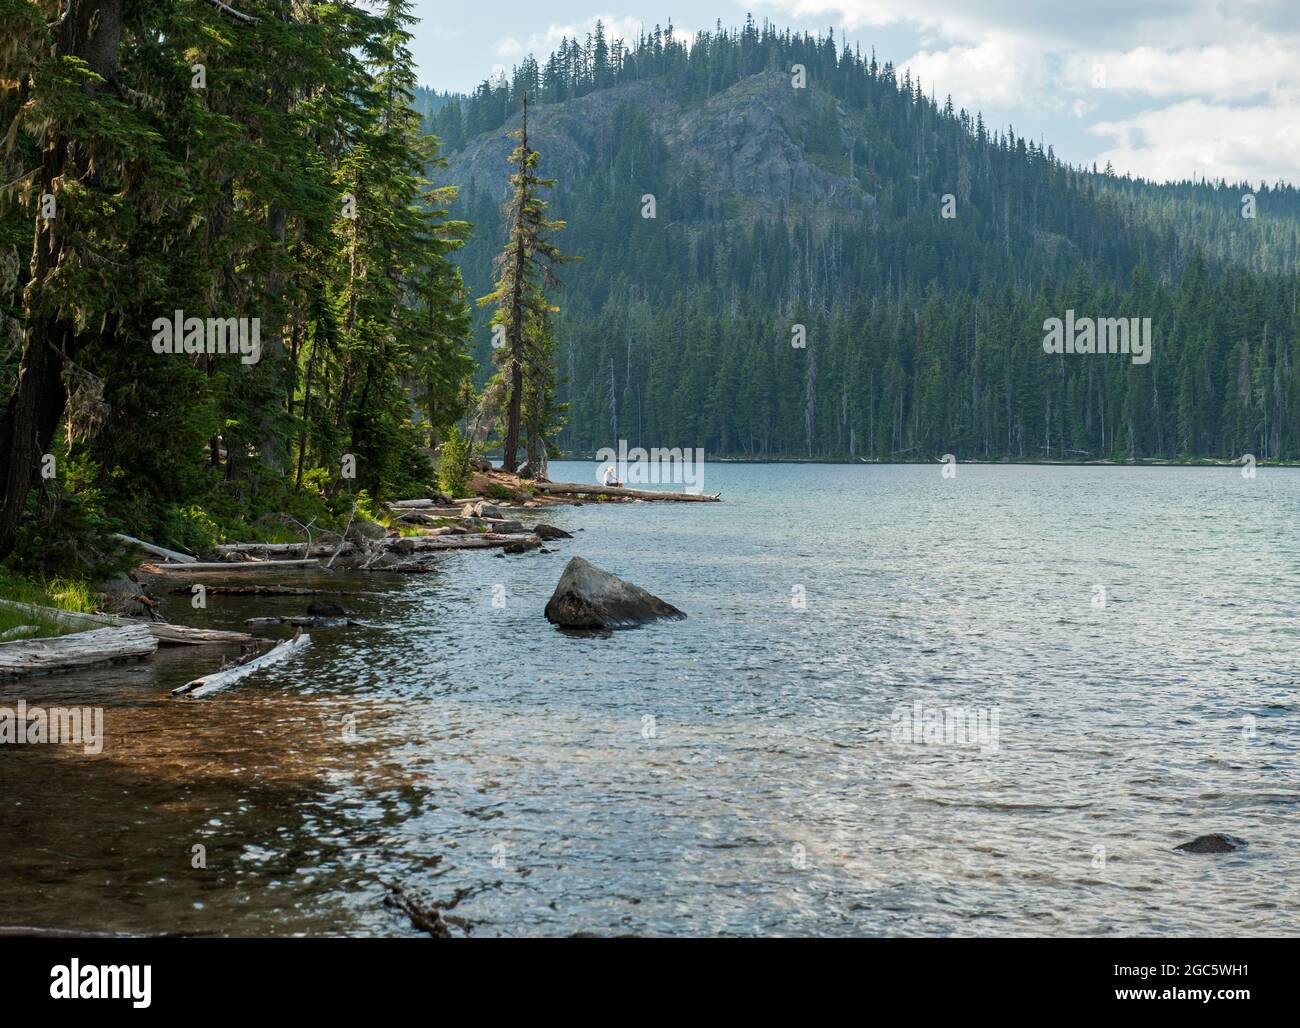 Man sitting on a log by a lake in wilderness. Stock Photo